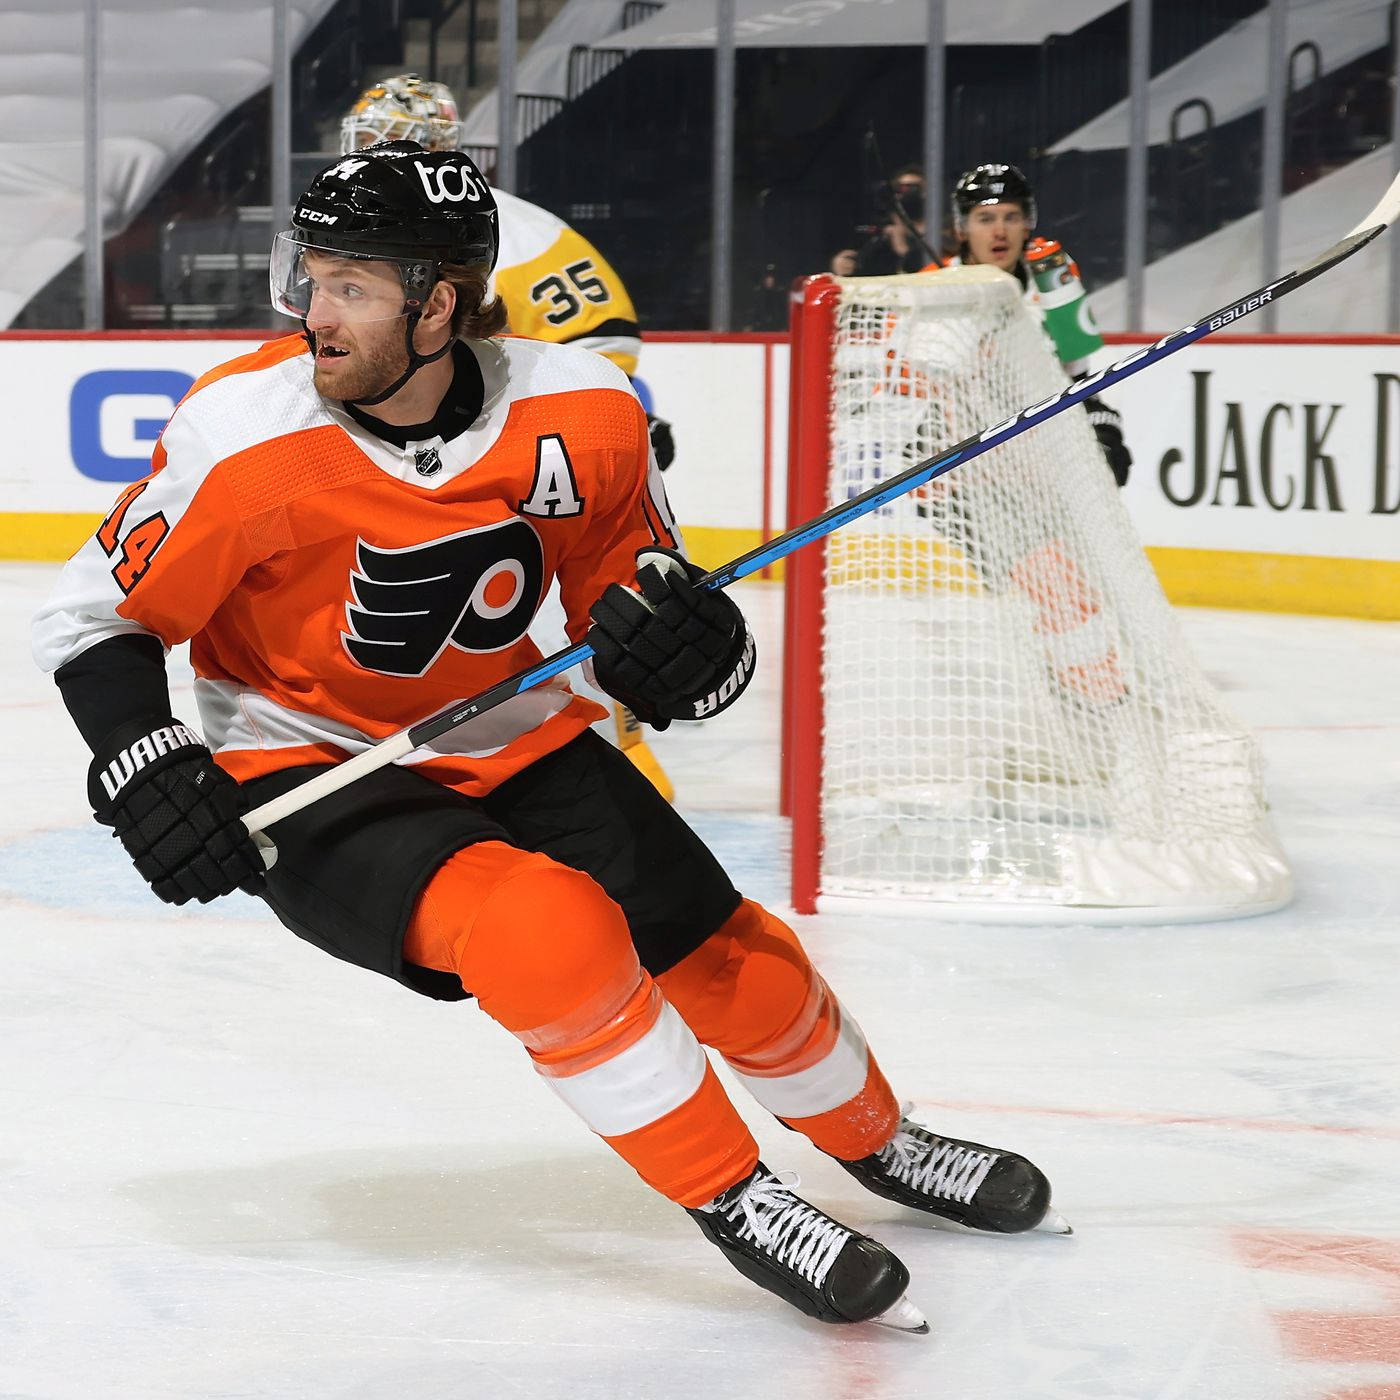 Sean Couturier Skating On The Rink Wallpaper